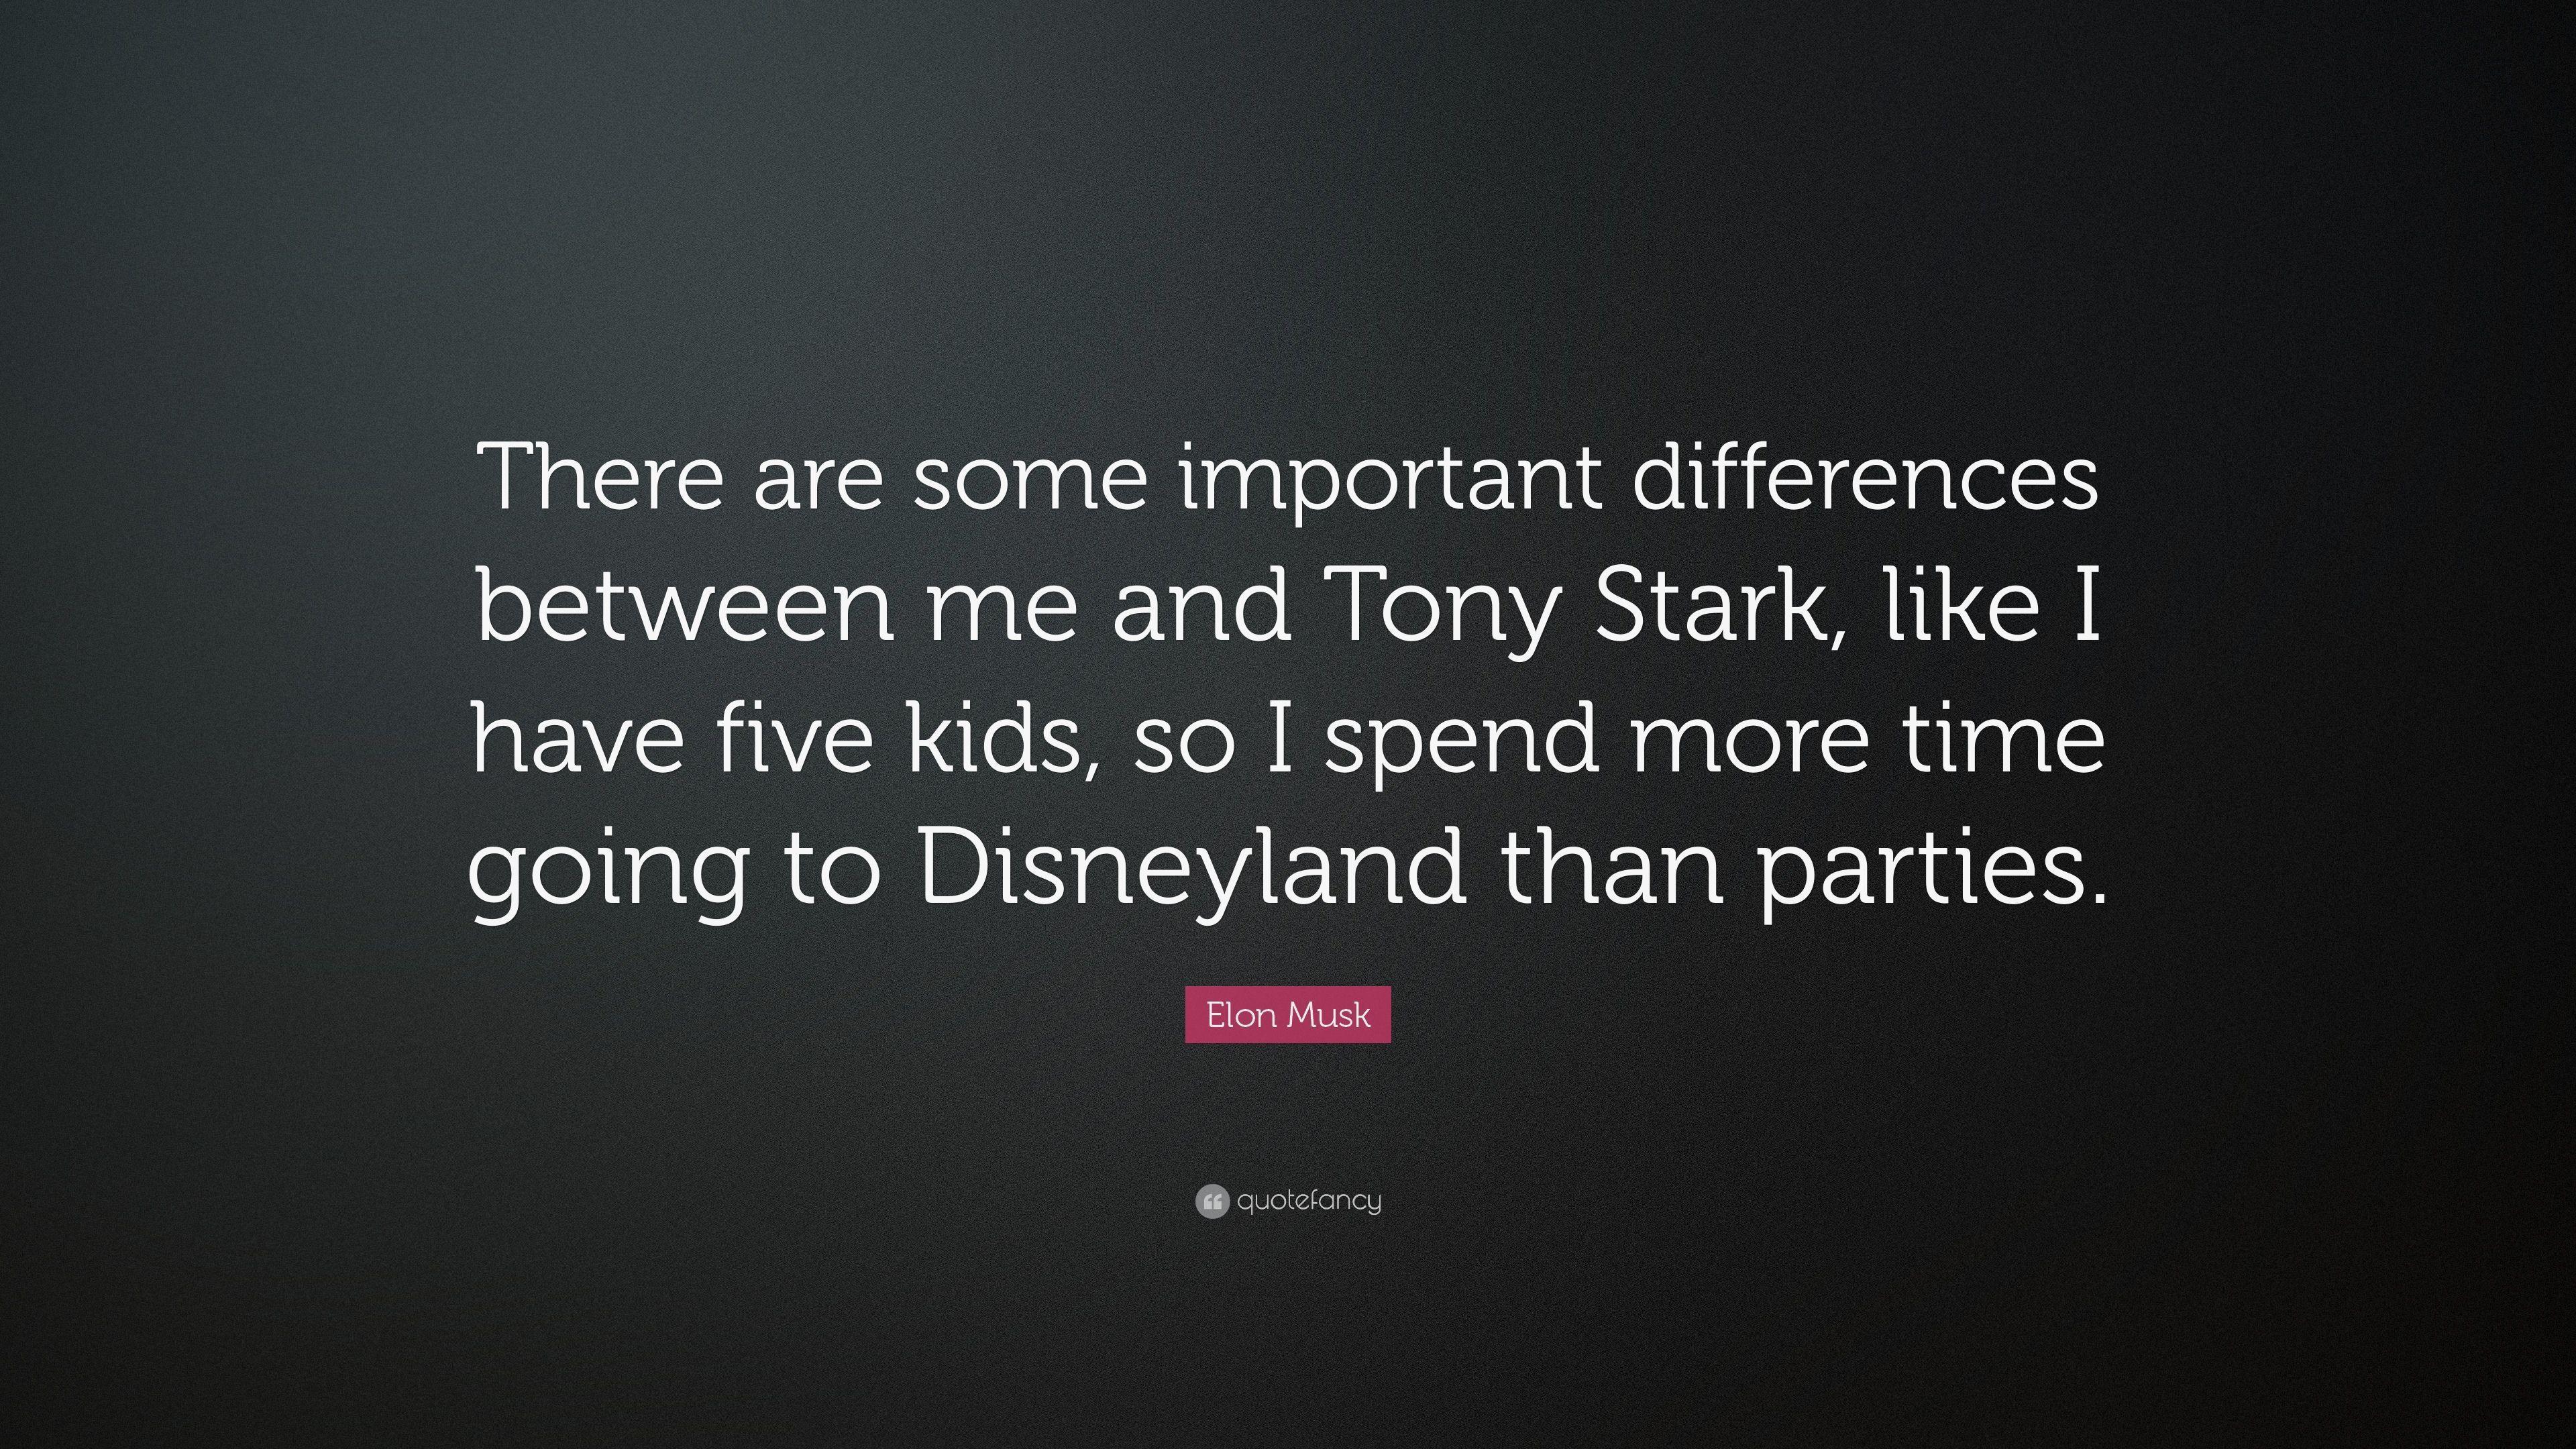 Elon Musk Quote: “There are some important differences between me